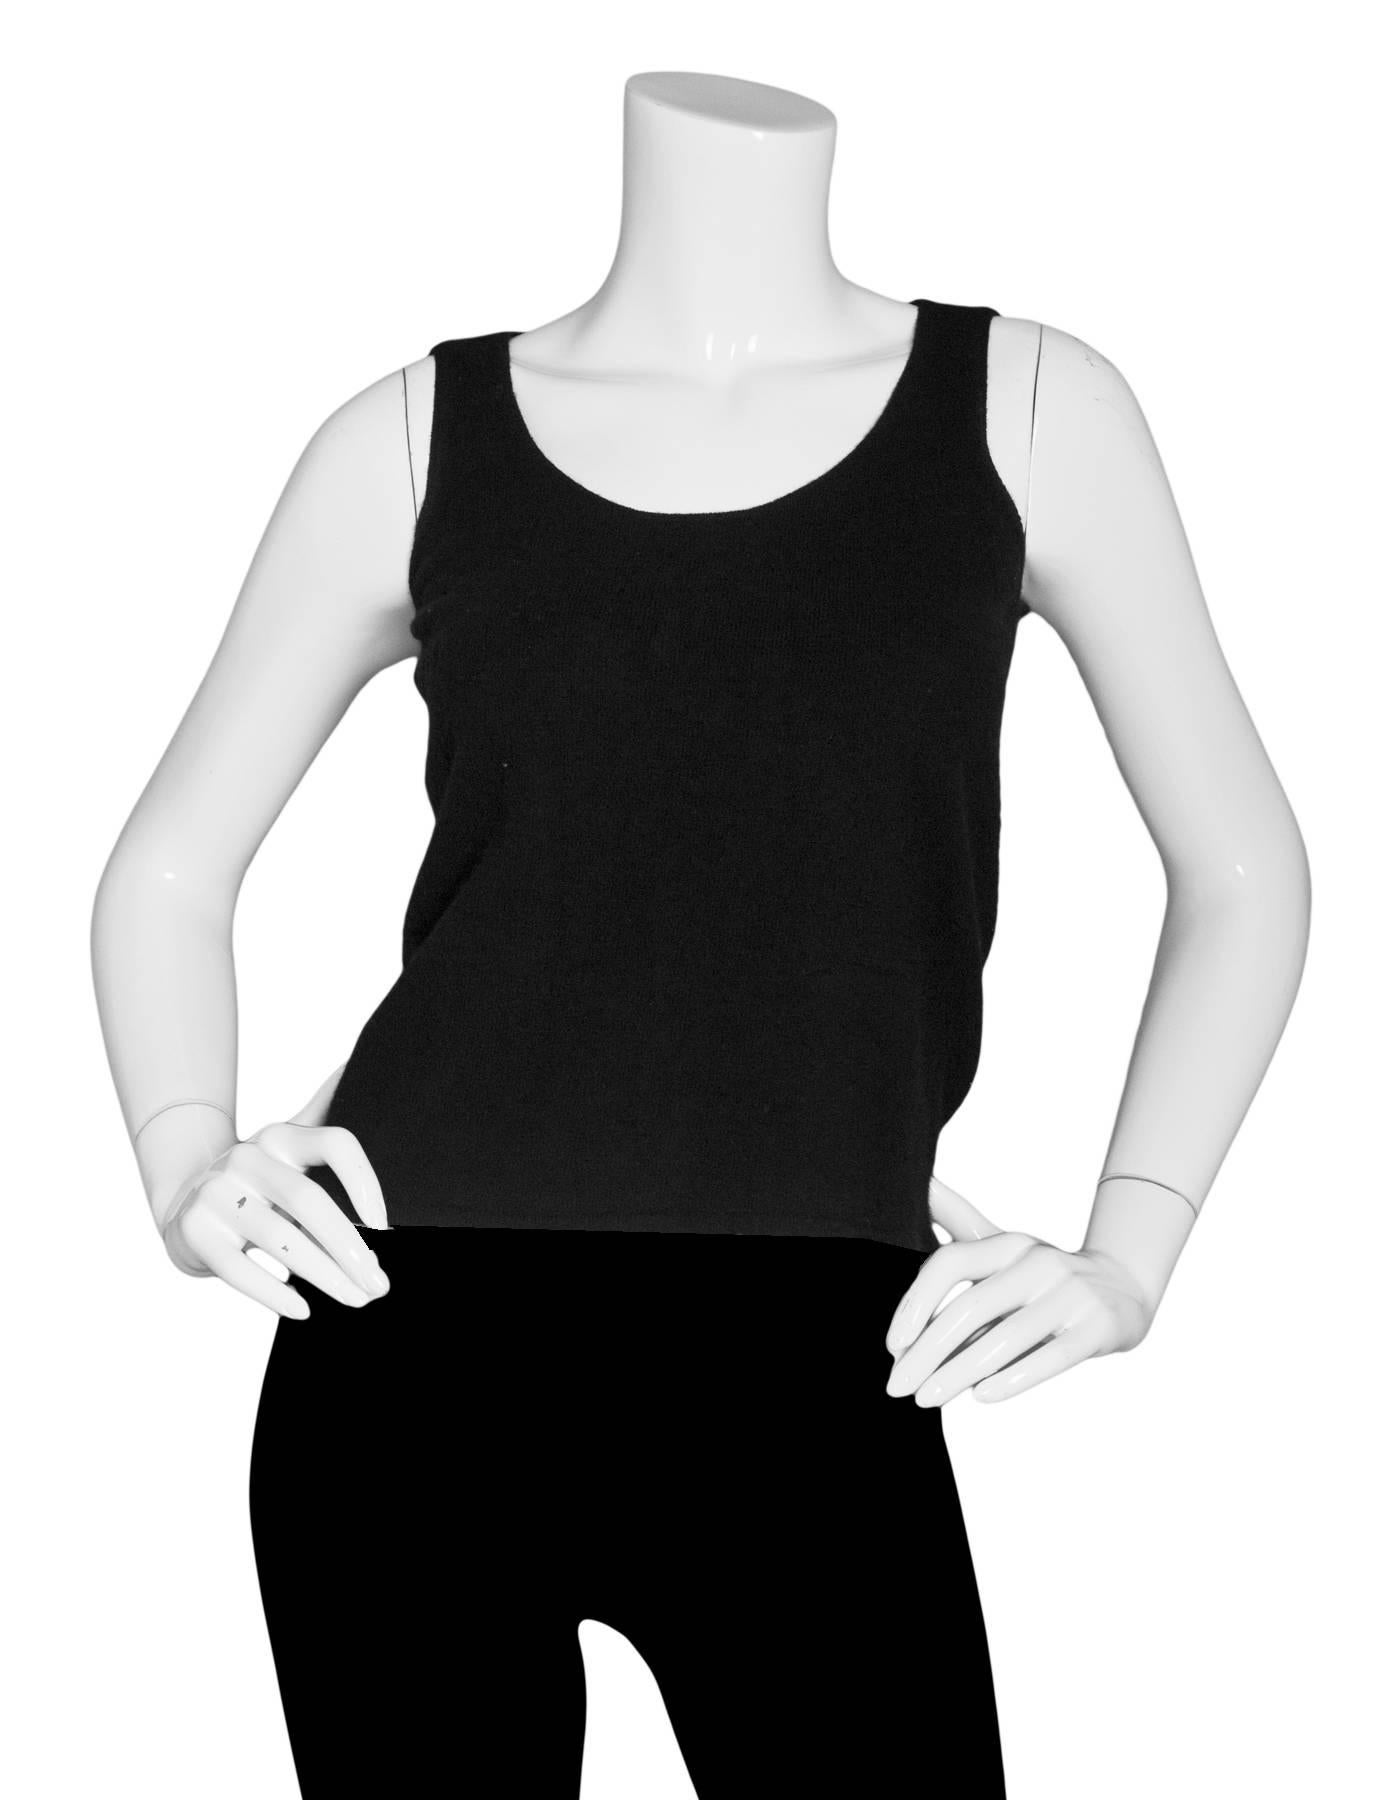 Chanel Black Sleeveless Top

Made In: United Kingdom
Year of Production: 2003
Color: Black
Composition: Illedgable - feels like cashmere
Lining: None
Closure/Opening: Pull over 
Exterior Pockets: None
Interior Pockets: None
Overall Condition: Very